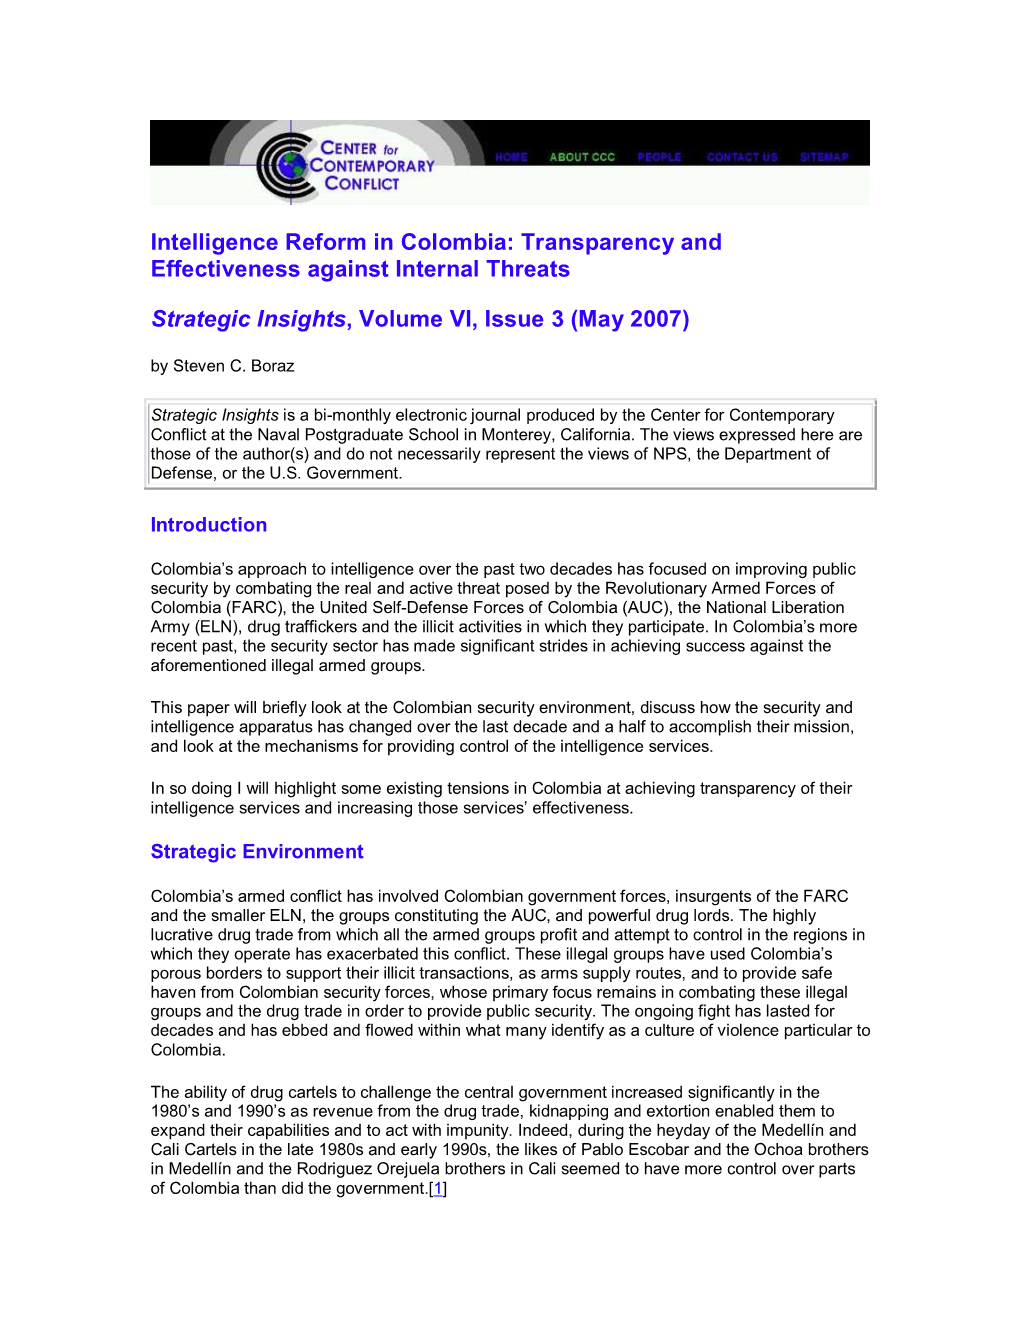 Intelligence Reform in Colombia: Transparency and Effectiveness Against Internal Threats -- Strategic Insights, Volume VI, Issue